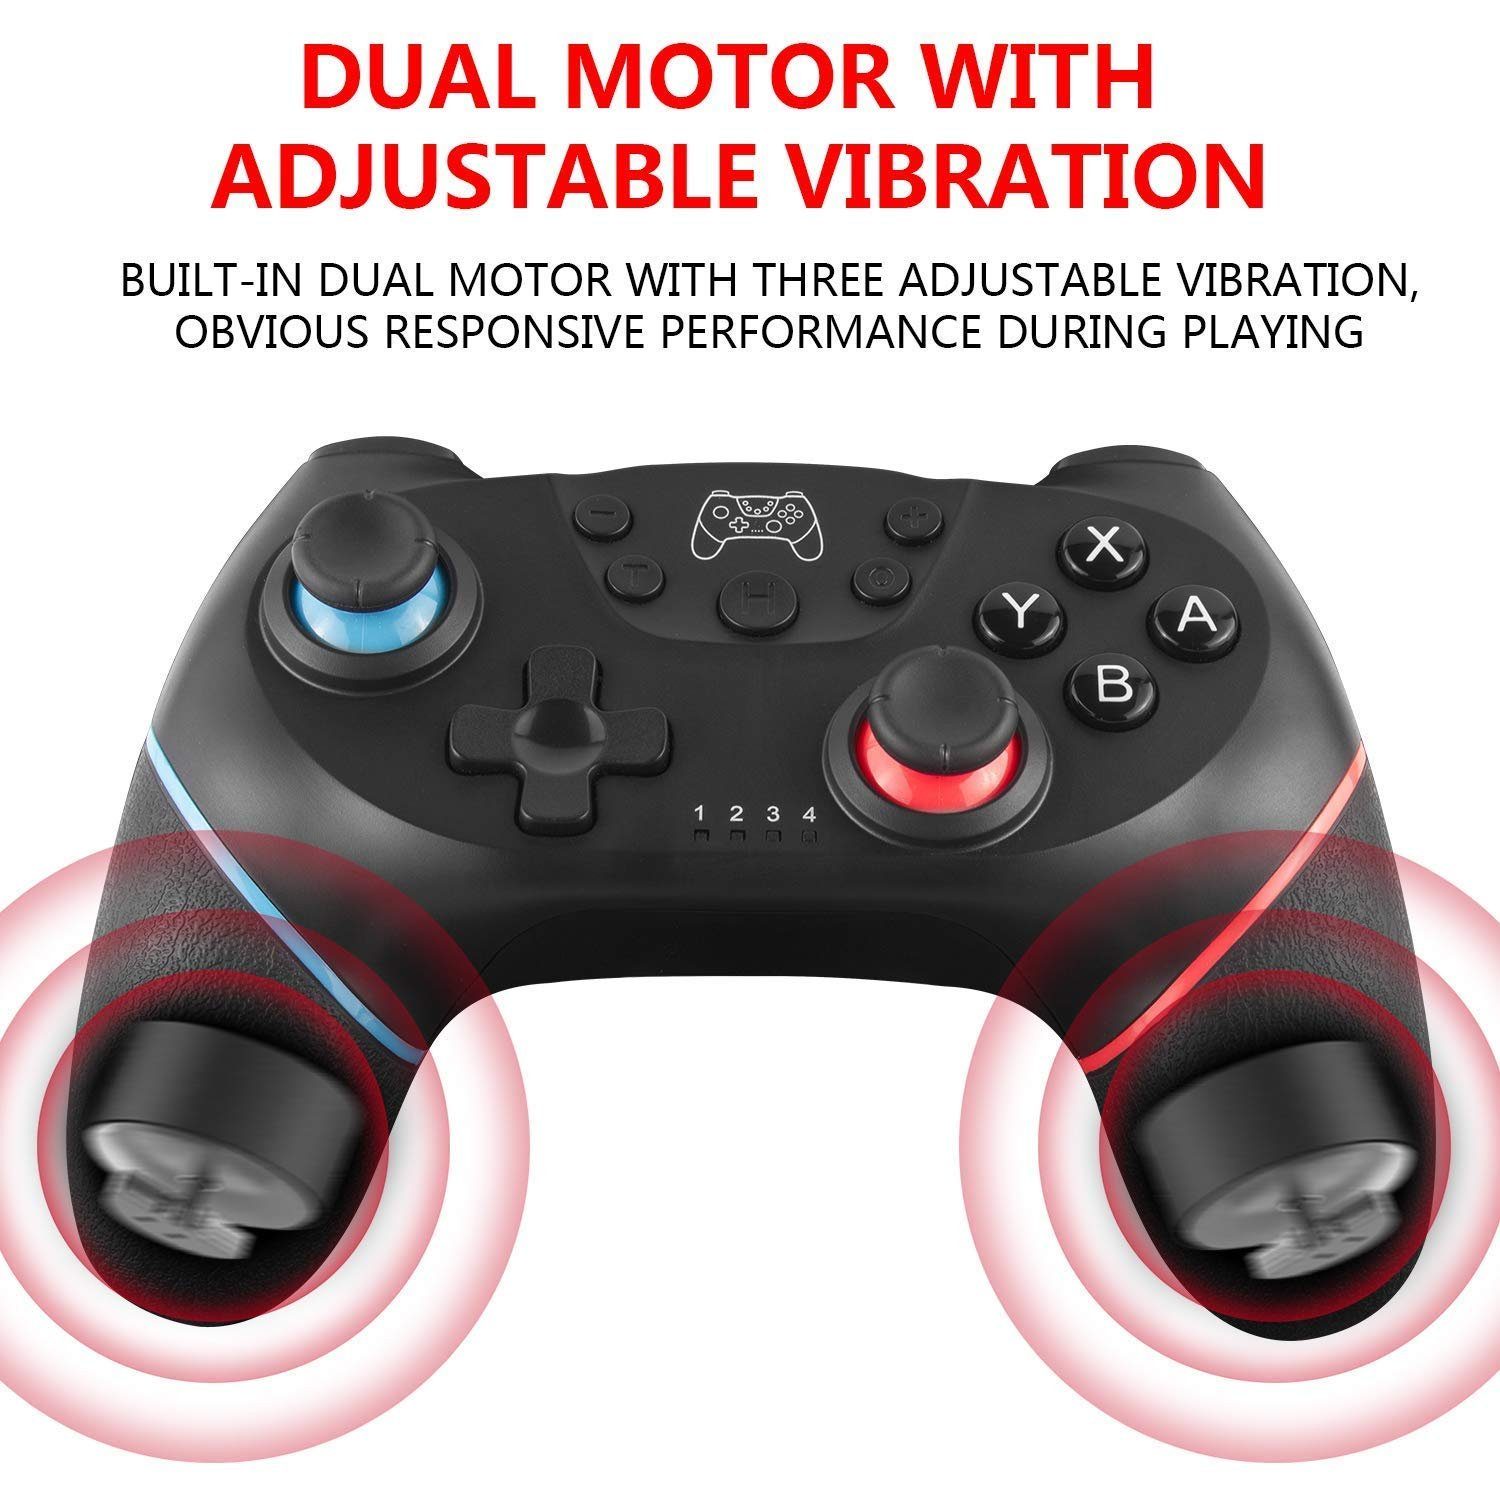 Switch/Switch für Pro, Weiß, 6 Achsen Lite/Switch Switch-Controller (Bluetooth Haiaveng Gamepad) Controllers OLED Funktion Wireless Turbo Switch